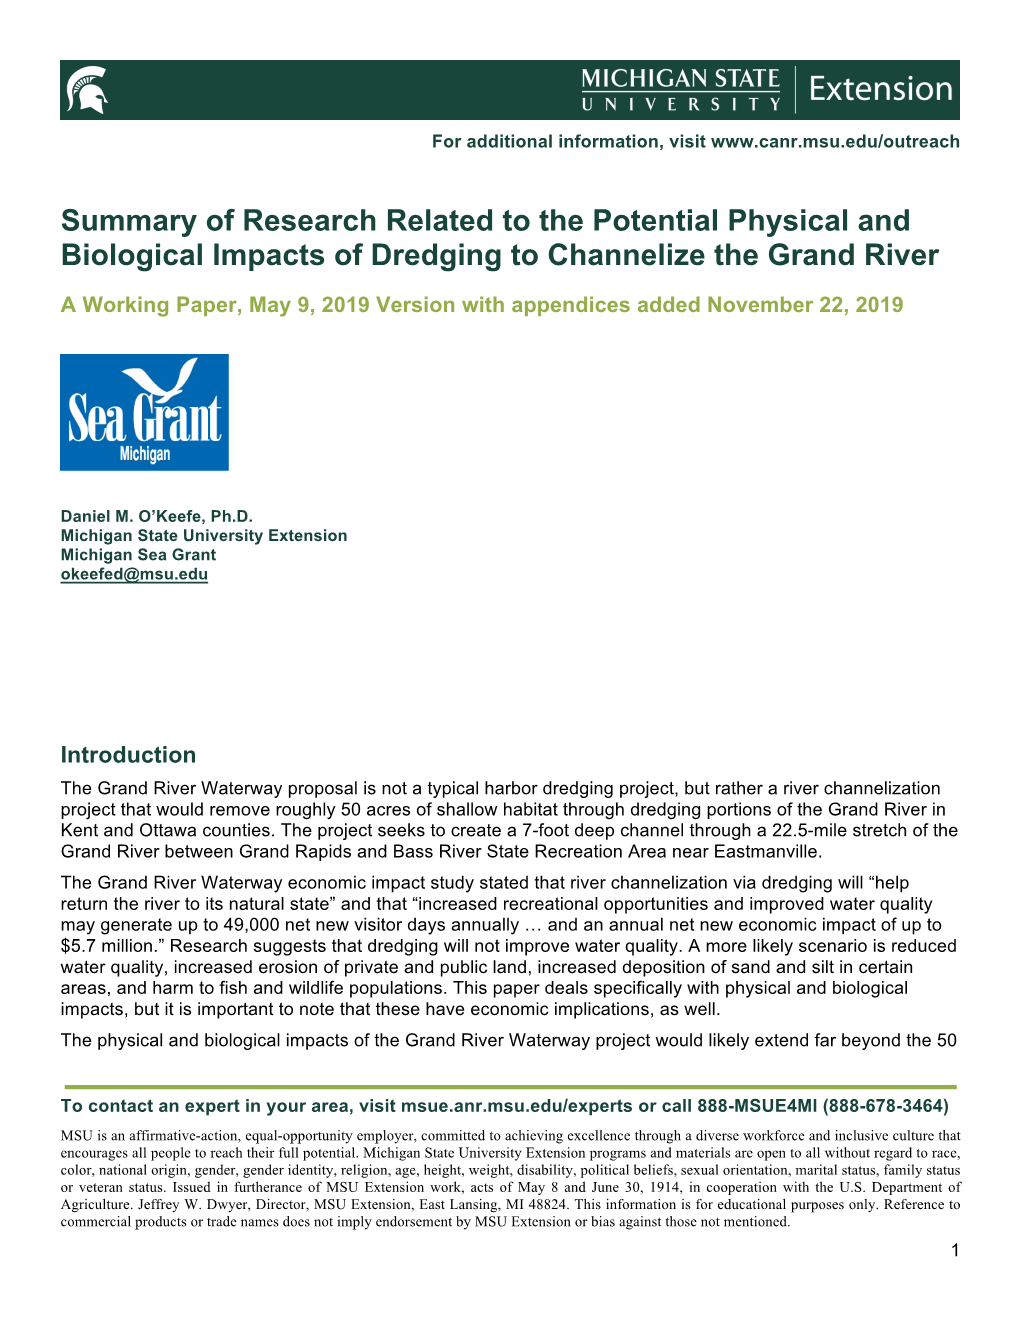 Summary of Research Related to the Potential Physical and Biological Impacts of Dredging to Channelize the Grand River